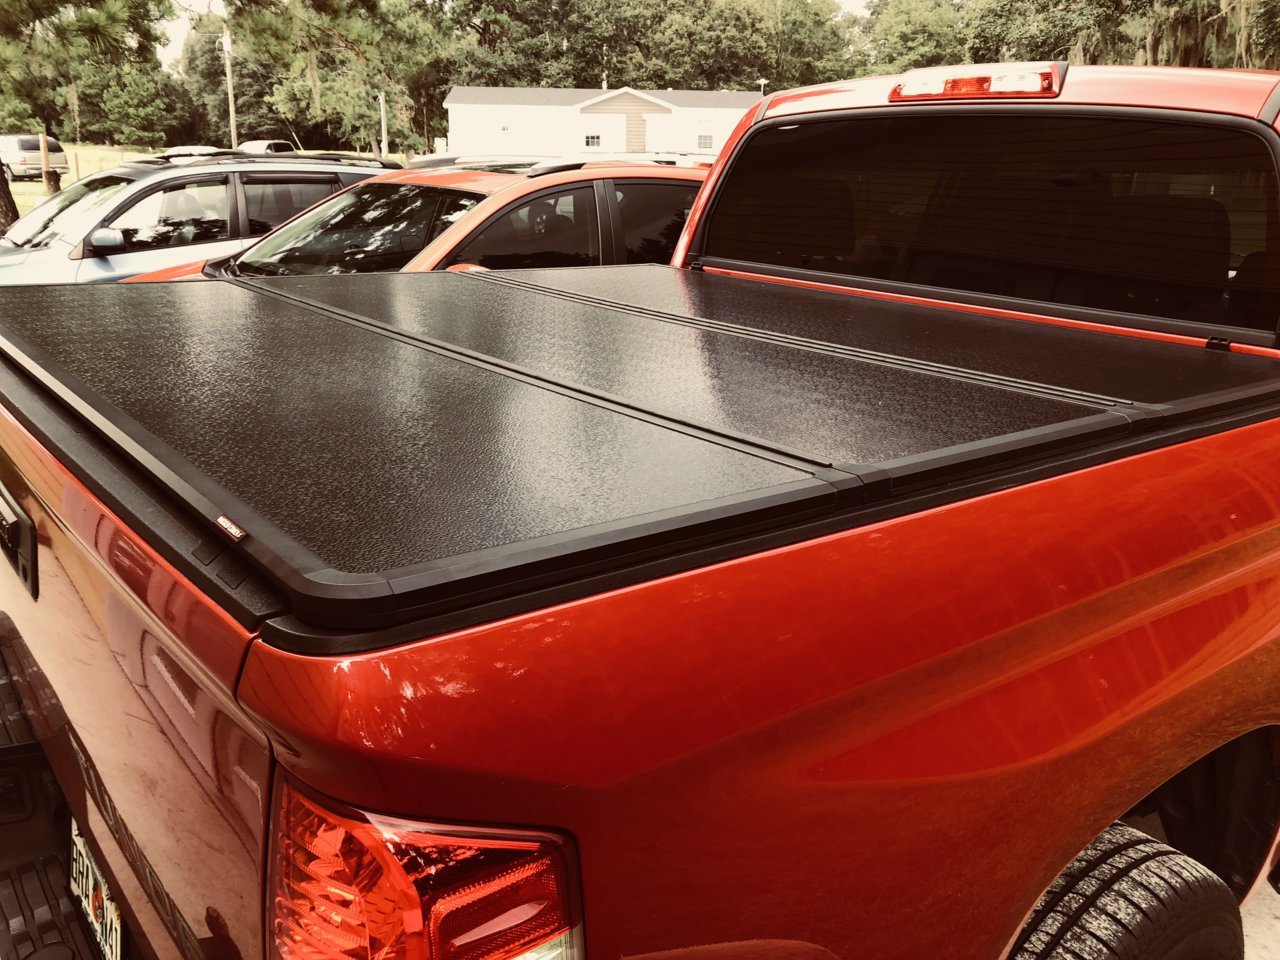 2018 CM Tonnue Cover (Rugged cover II) Toyota Tundra Forum